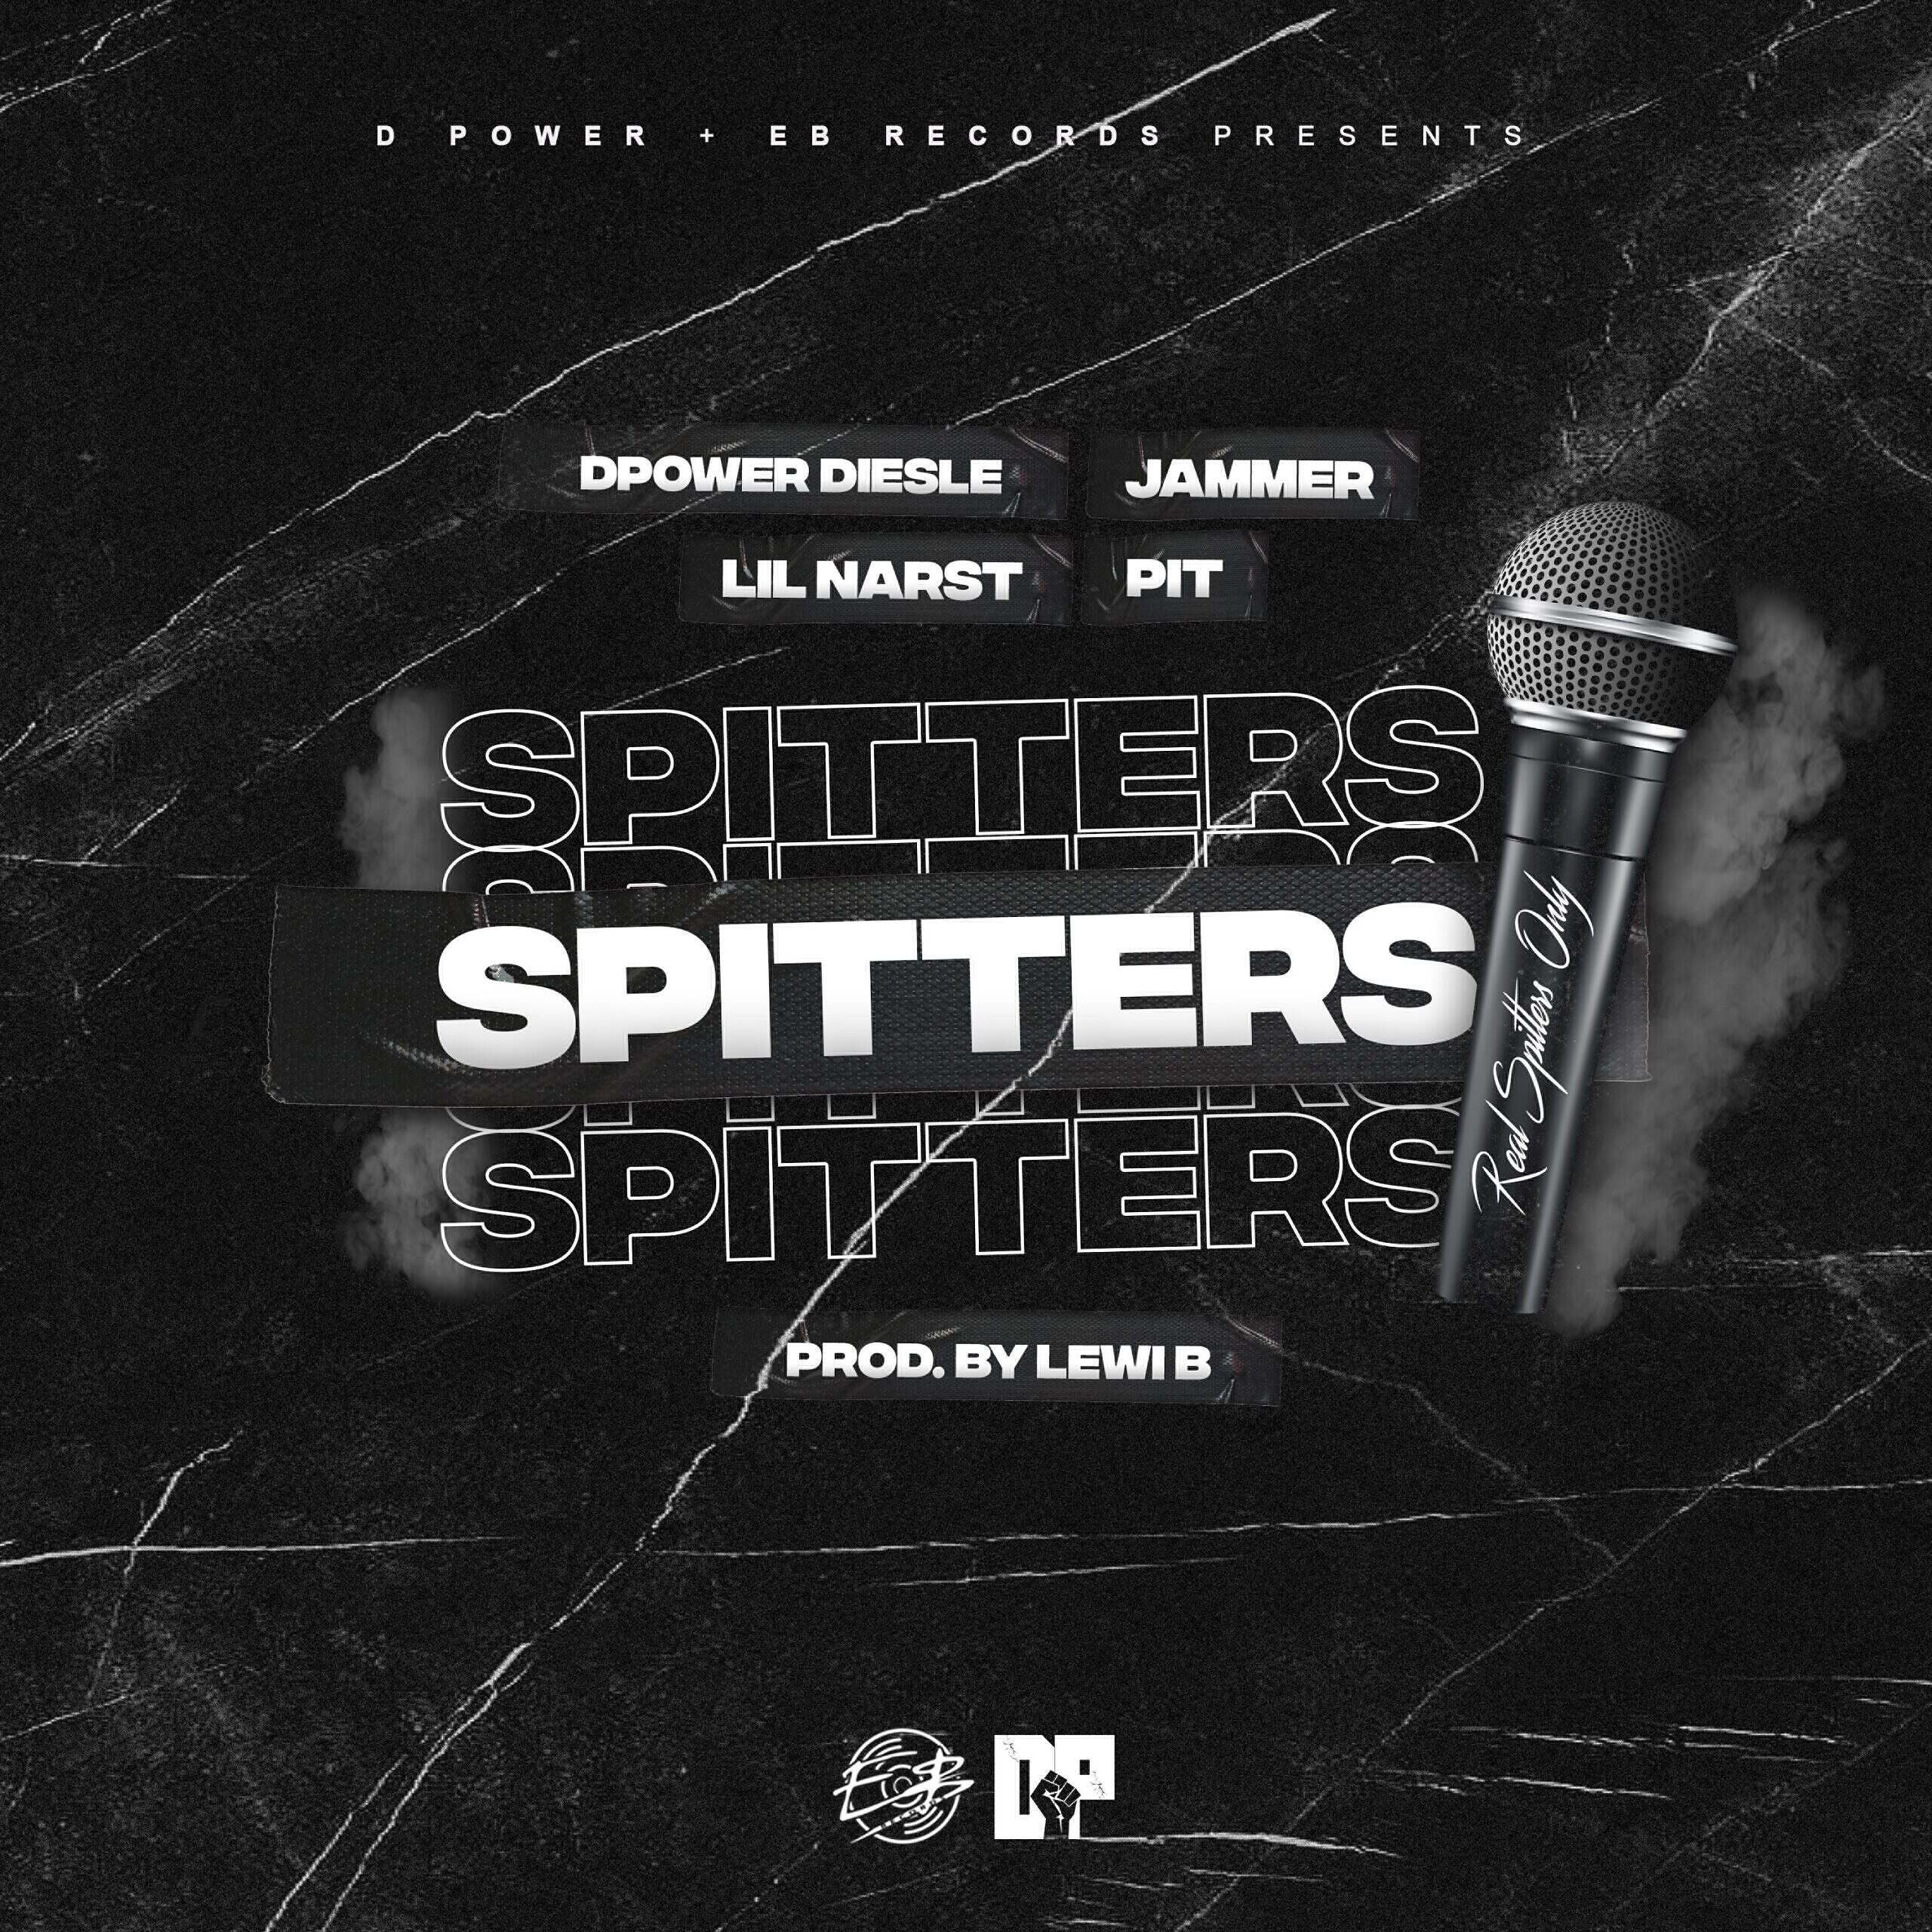 D Power Diesle feat. Jammer, Lil Narst, & Pit - Spitters (Audio)